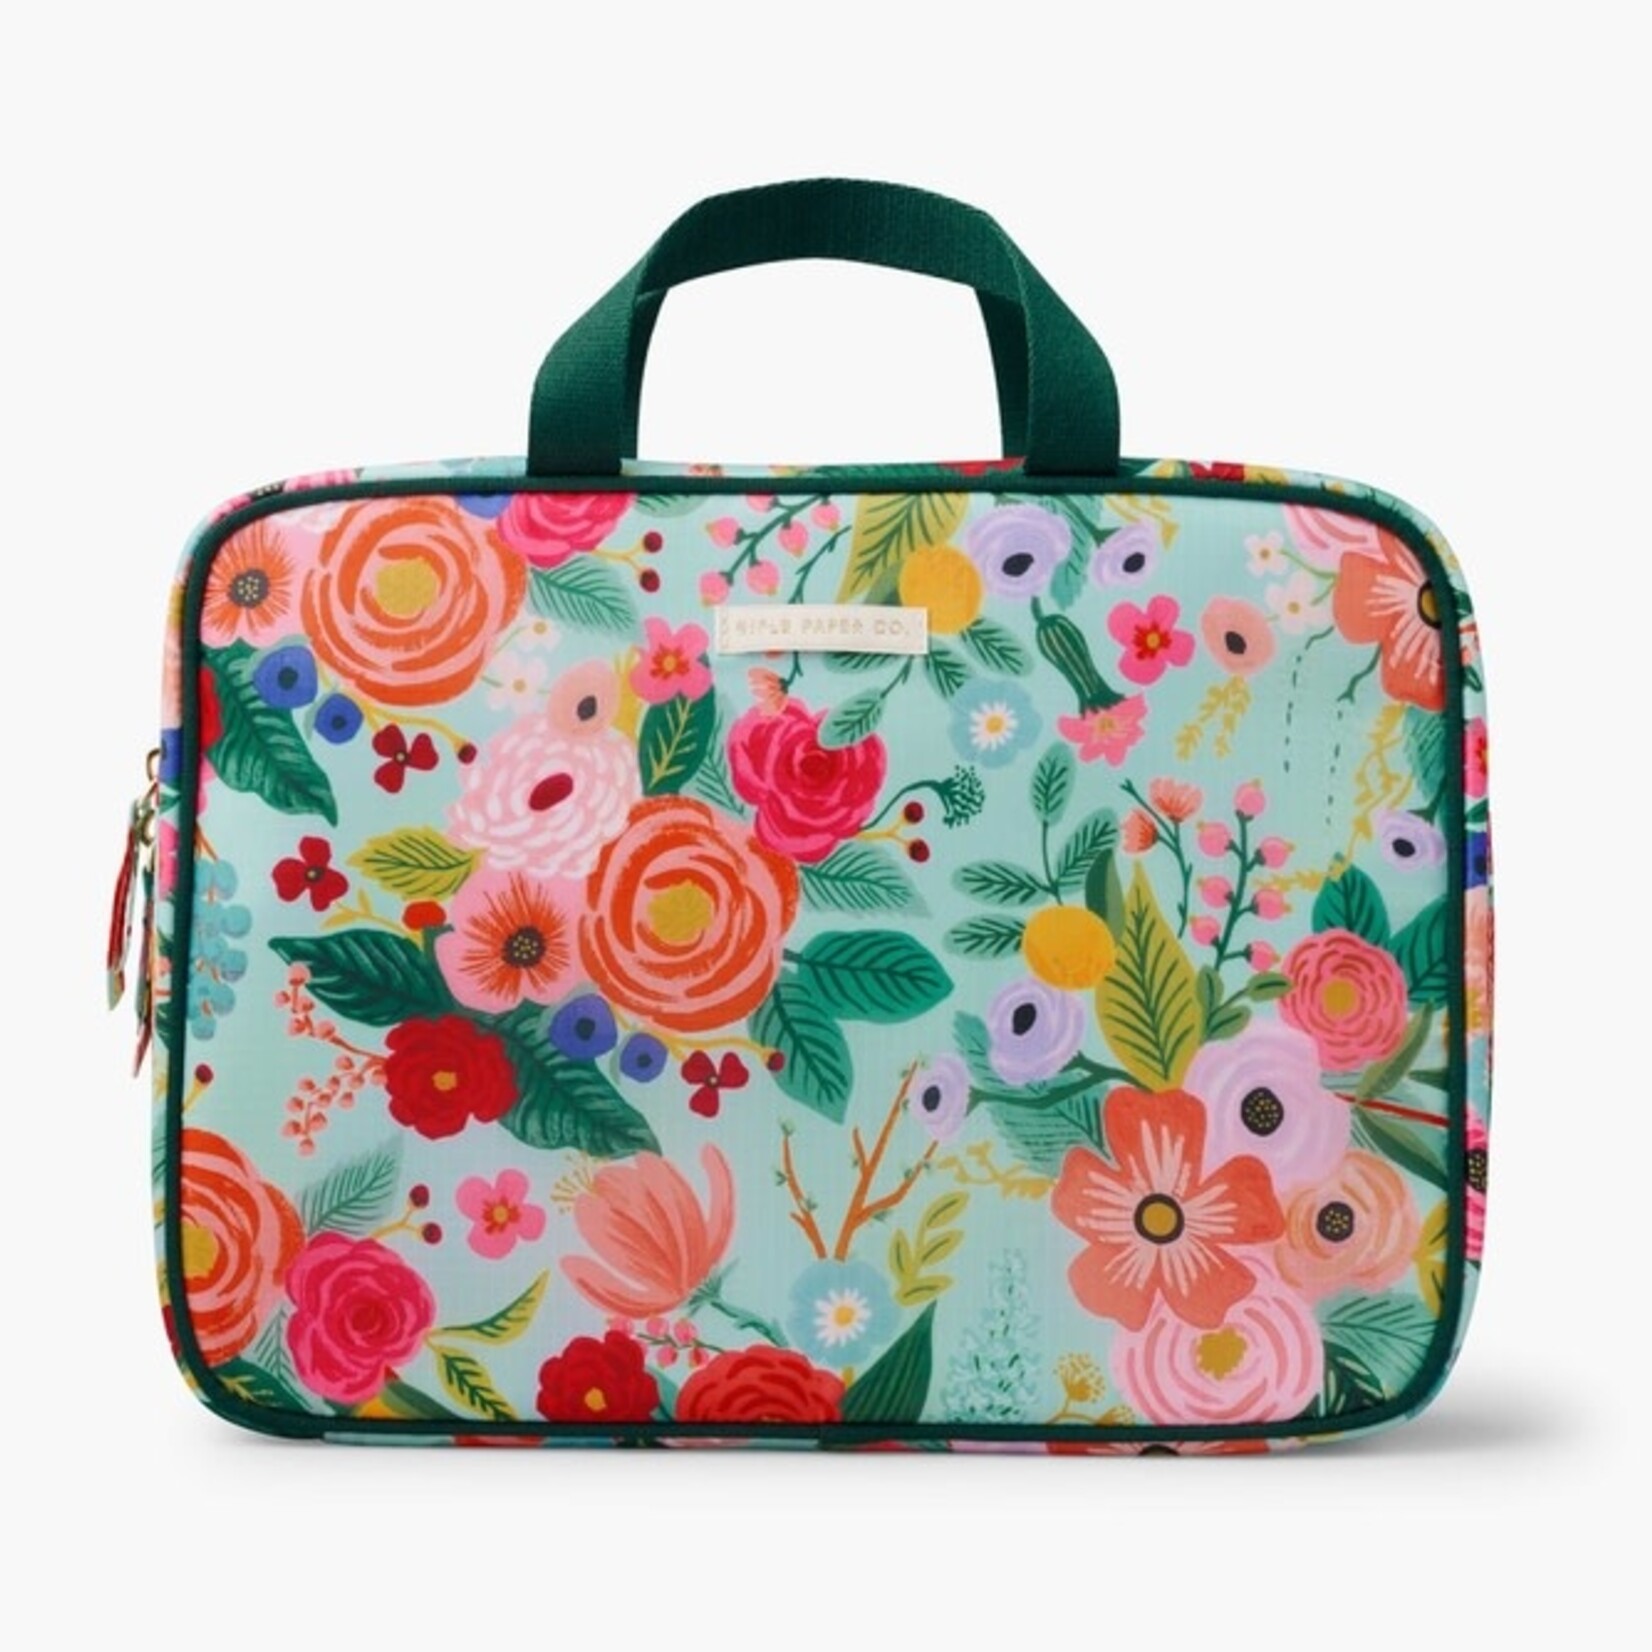 Rifle Paper Co Travel Cosmetic Case